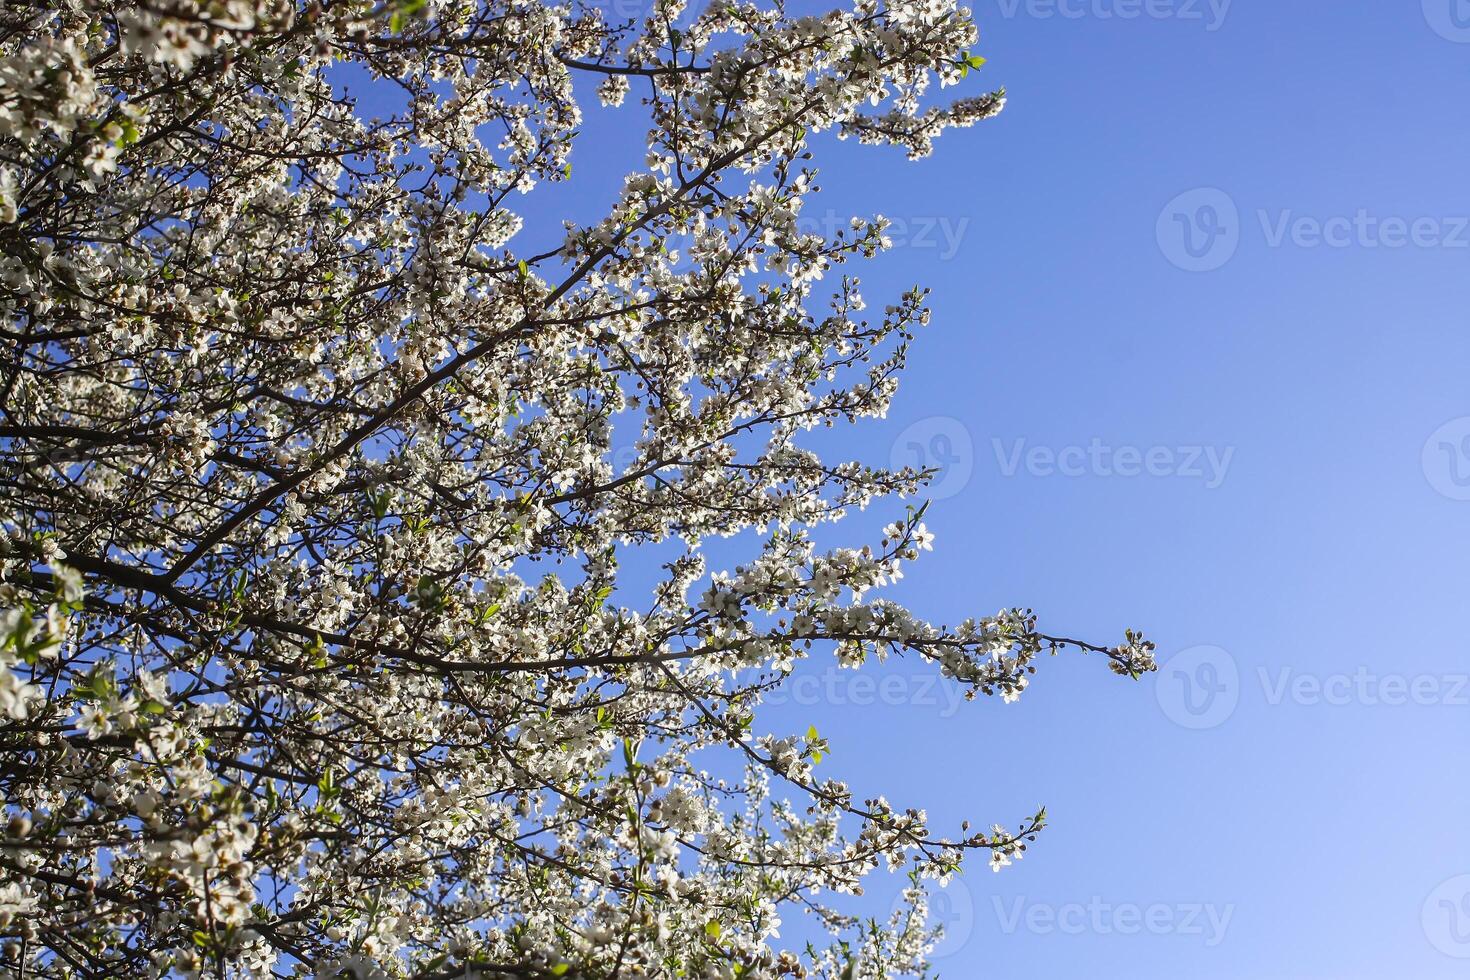 Bunches of appe tree blossom with white flowers against the blue sky background. photo